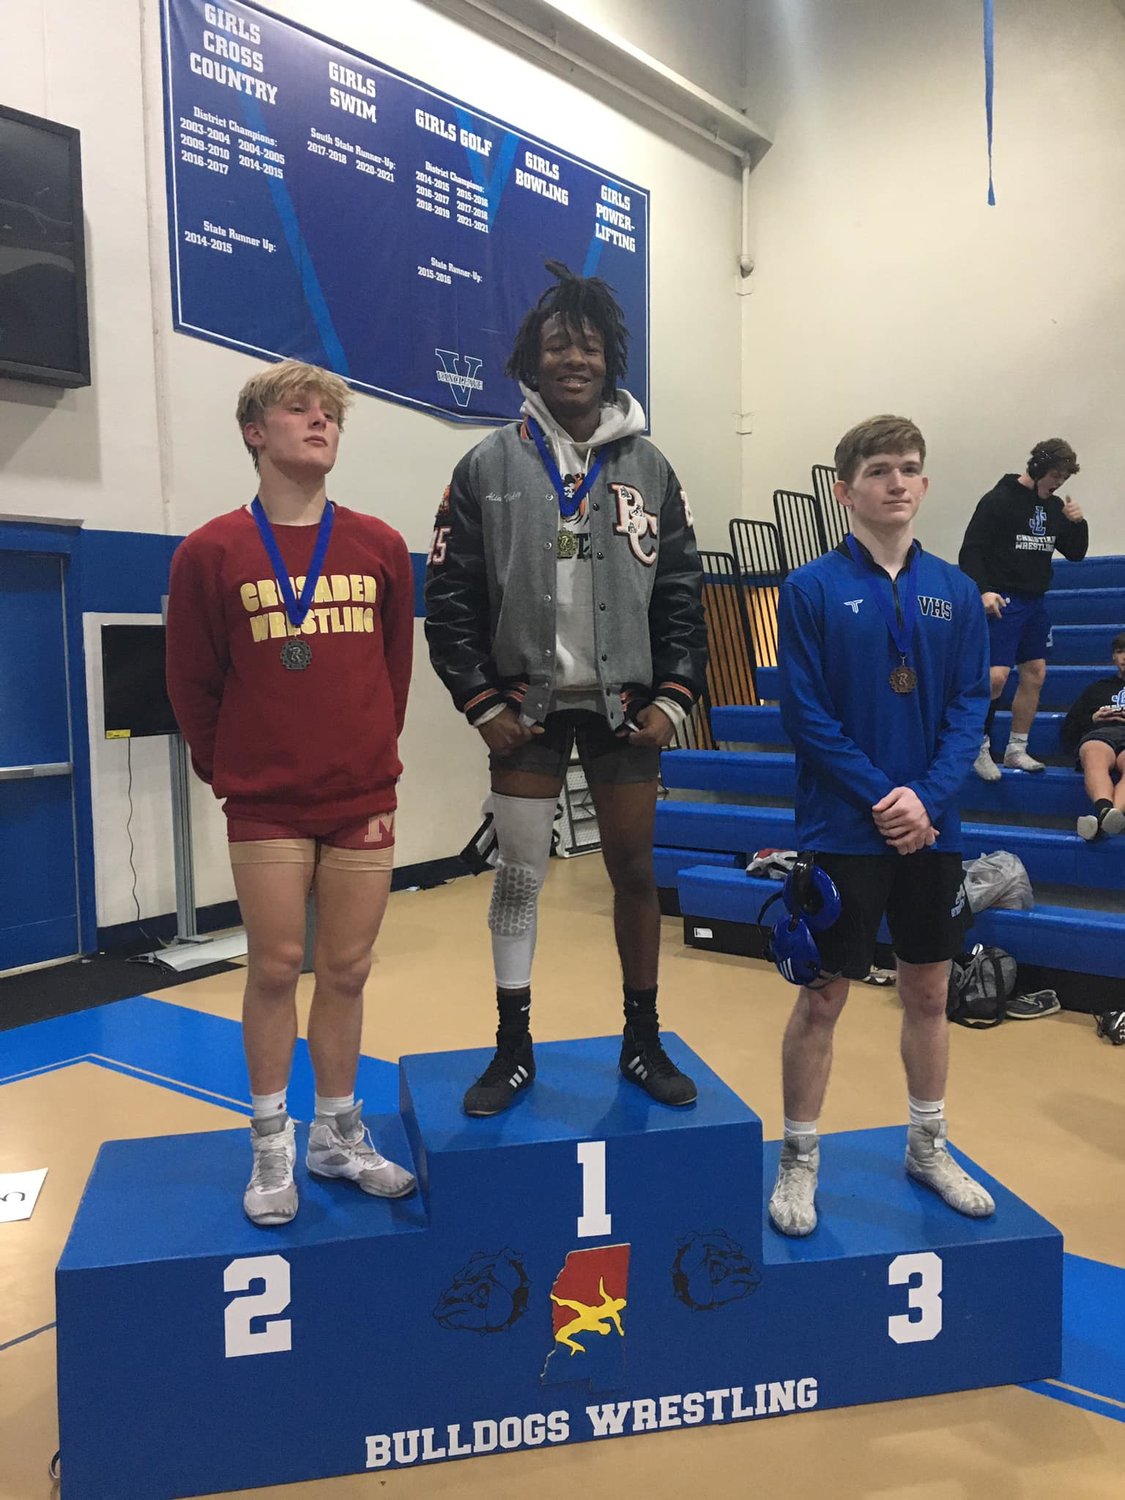 The 138-pound varsity division at the Bulldog Brawl in Vancleave, MS Dec. 16 was won by Baldwin County’s Nick Portis as one of three victories for Tiger wrestlers.